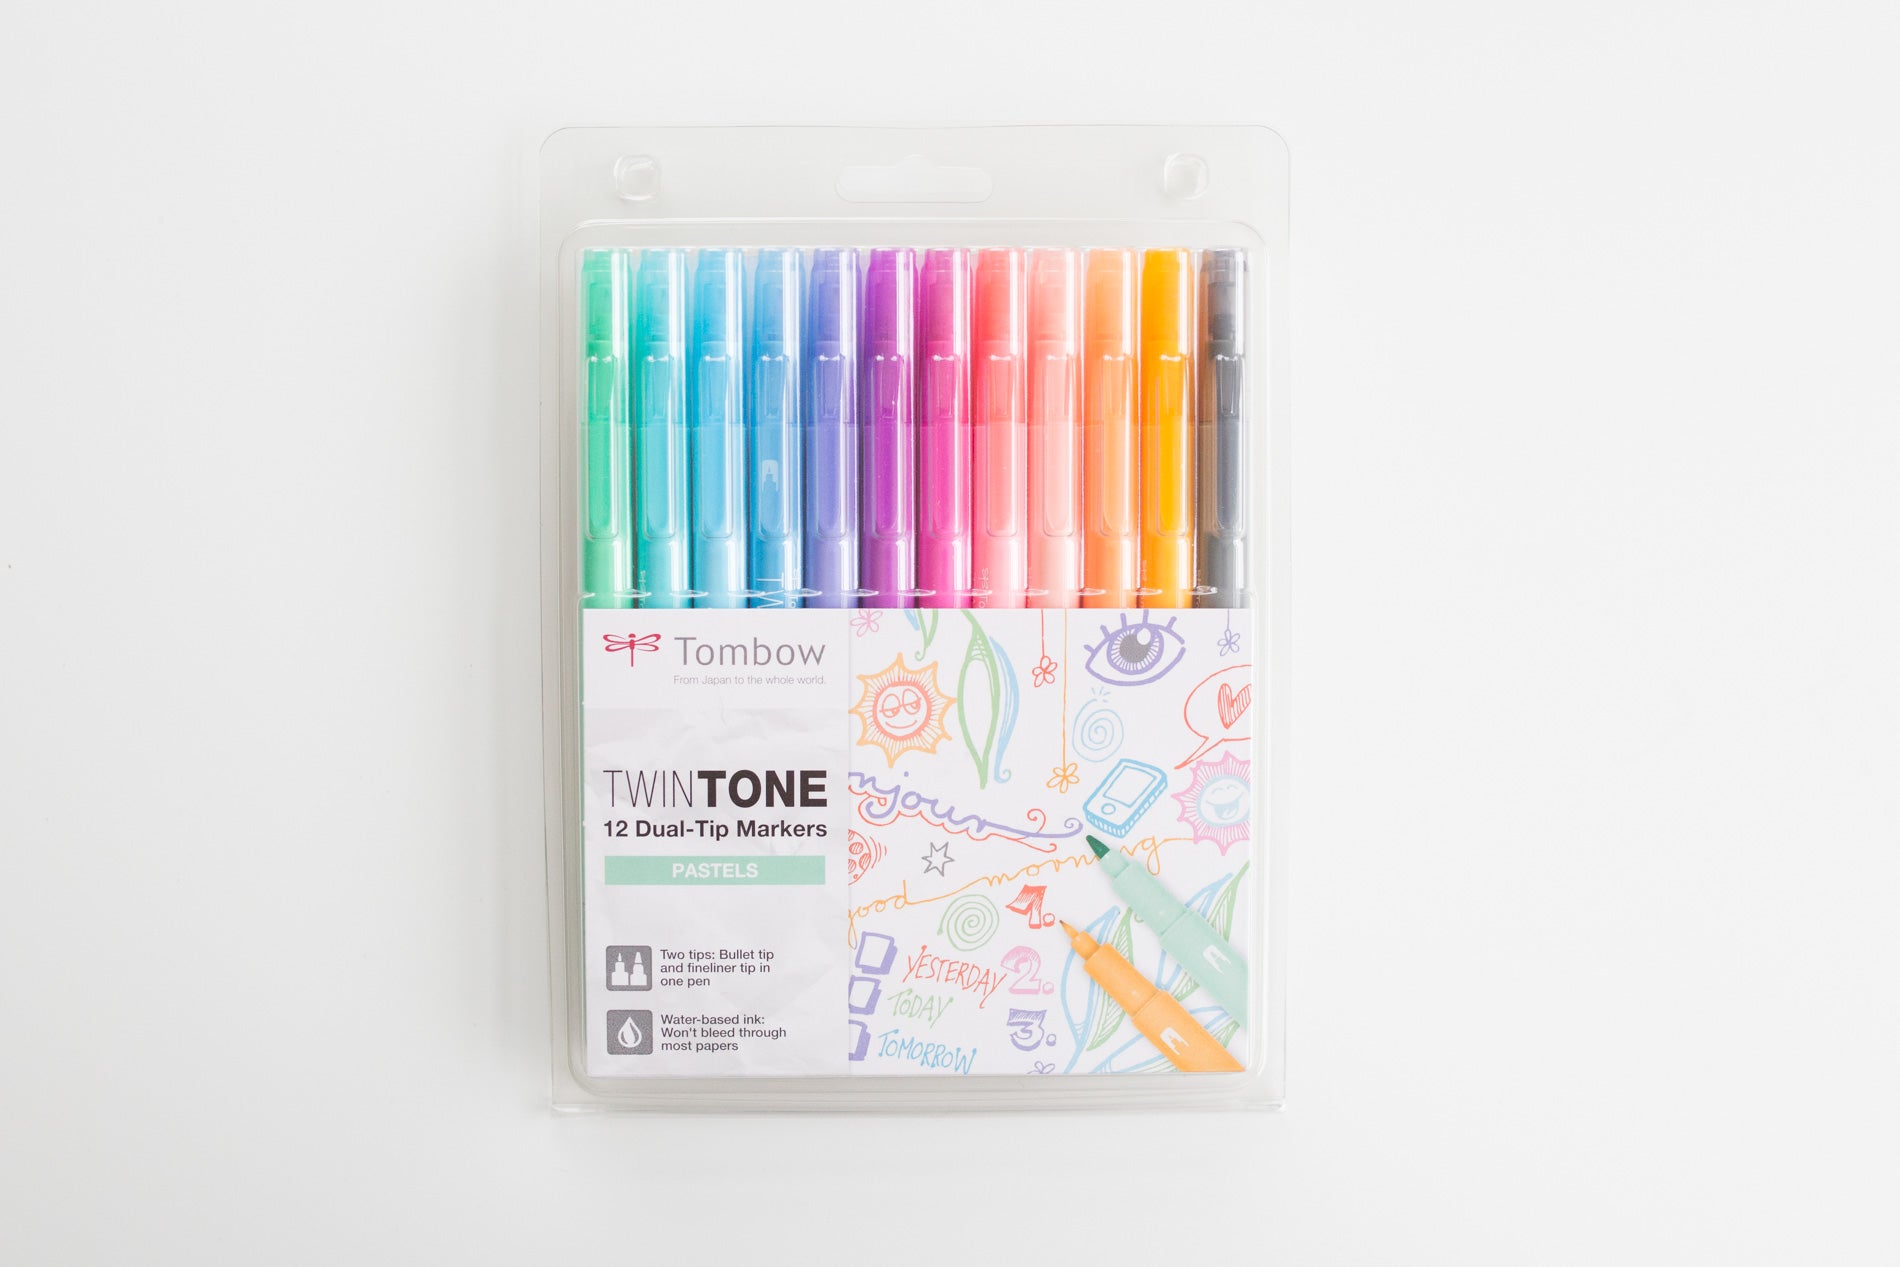 Tombow Twin Tone Pastels